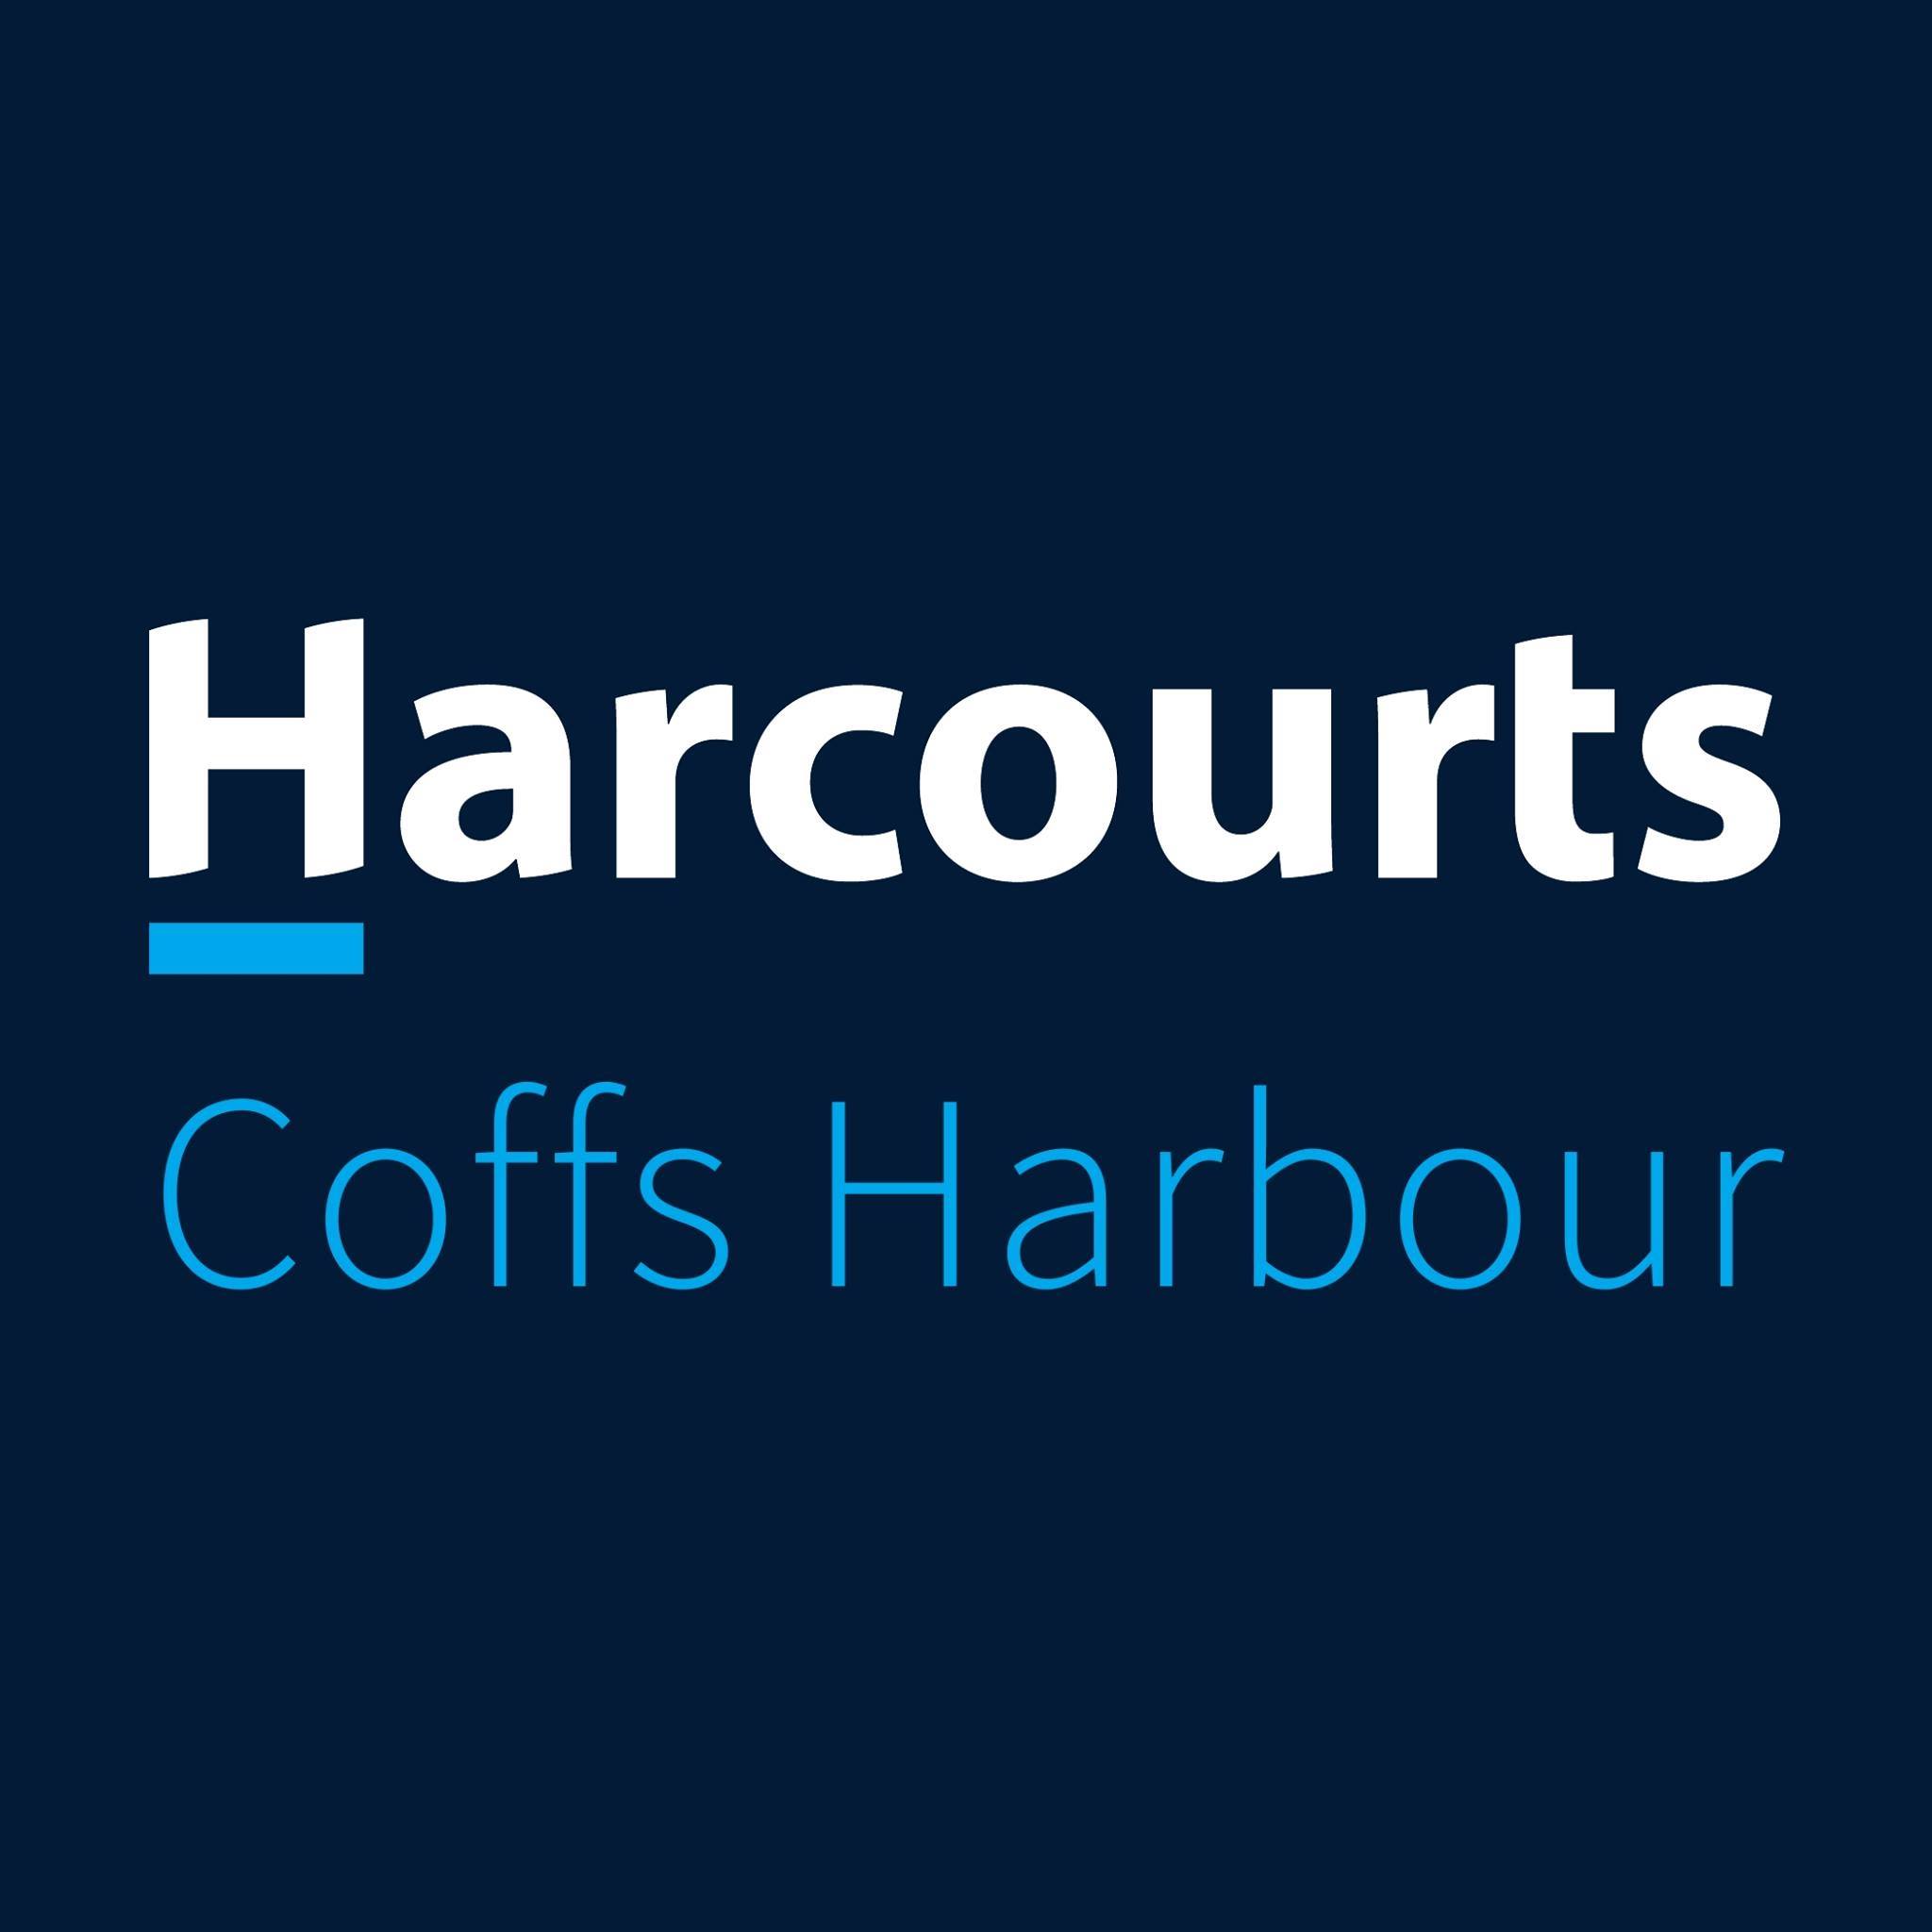 Company logo of Harcourts Coffs Harbour